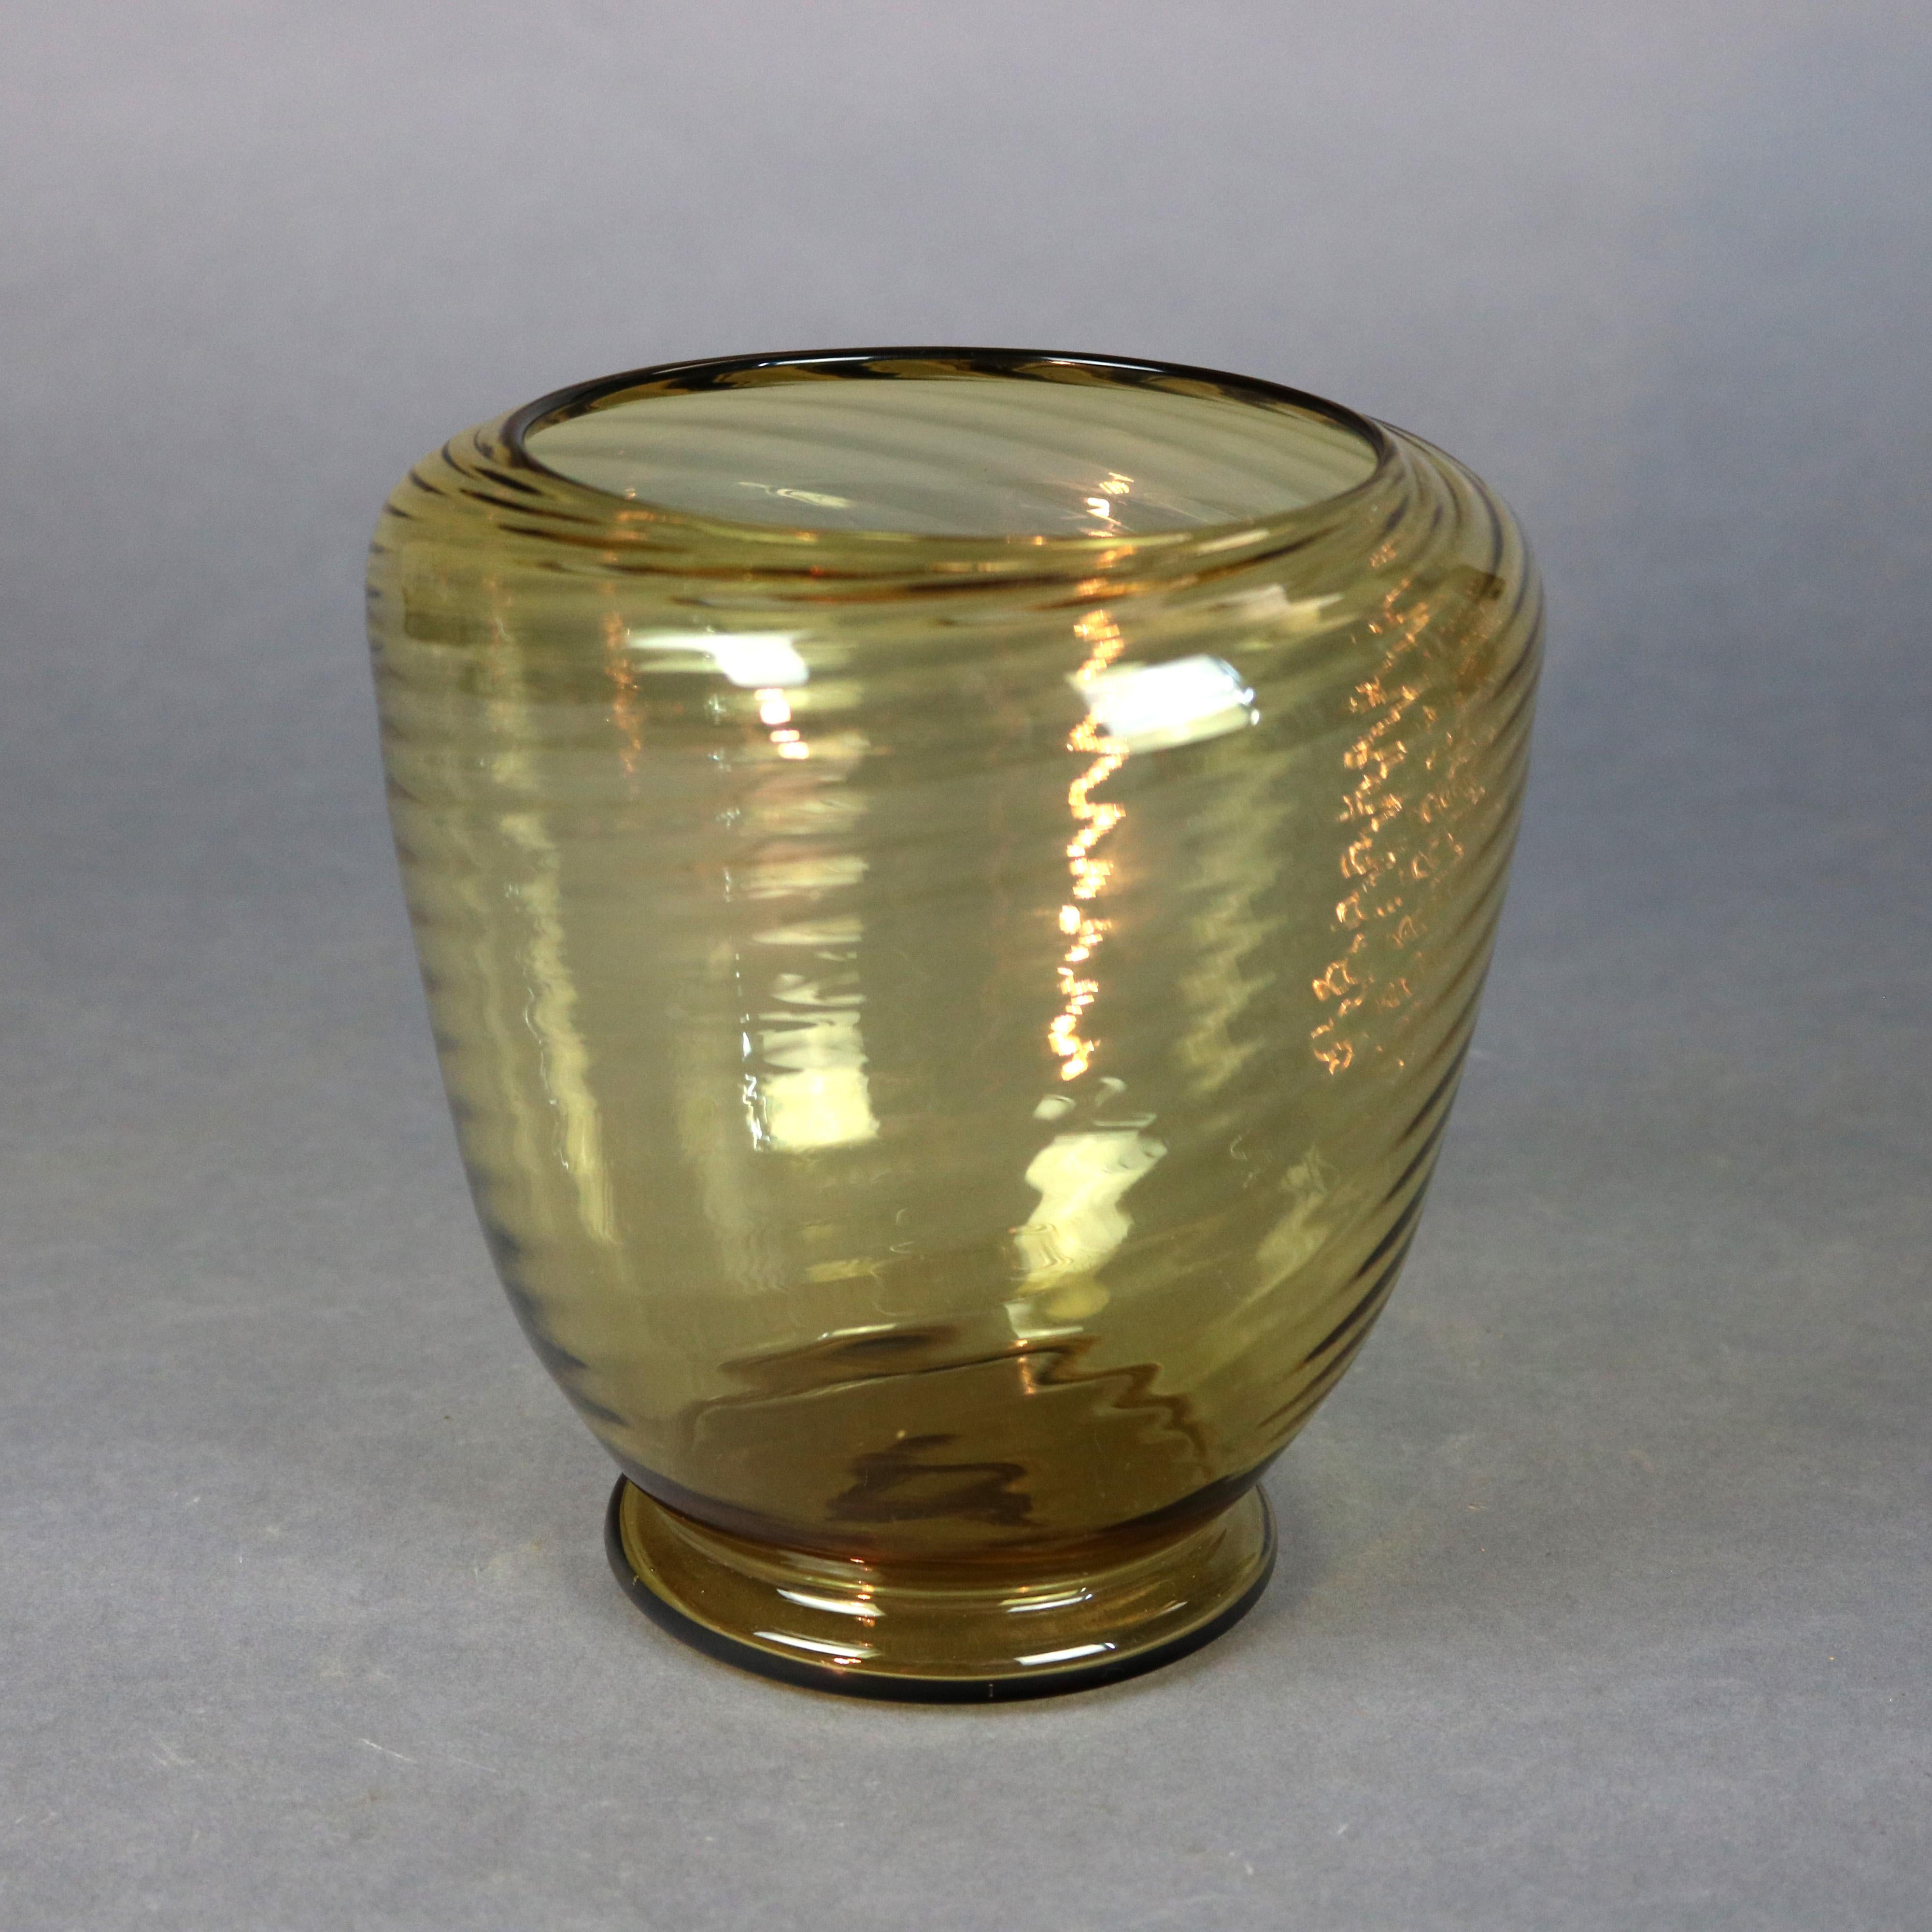 A vintage art glass vase by Steuben offers swirled amber glass, unsigned, 20th century

Measures: 6.75